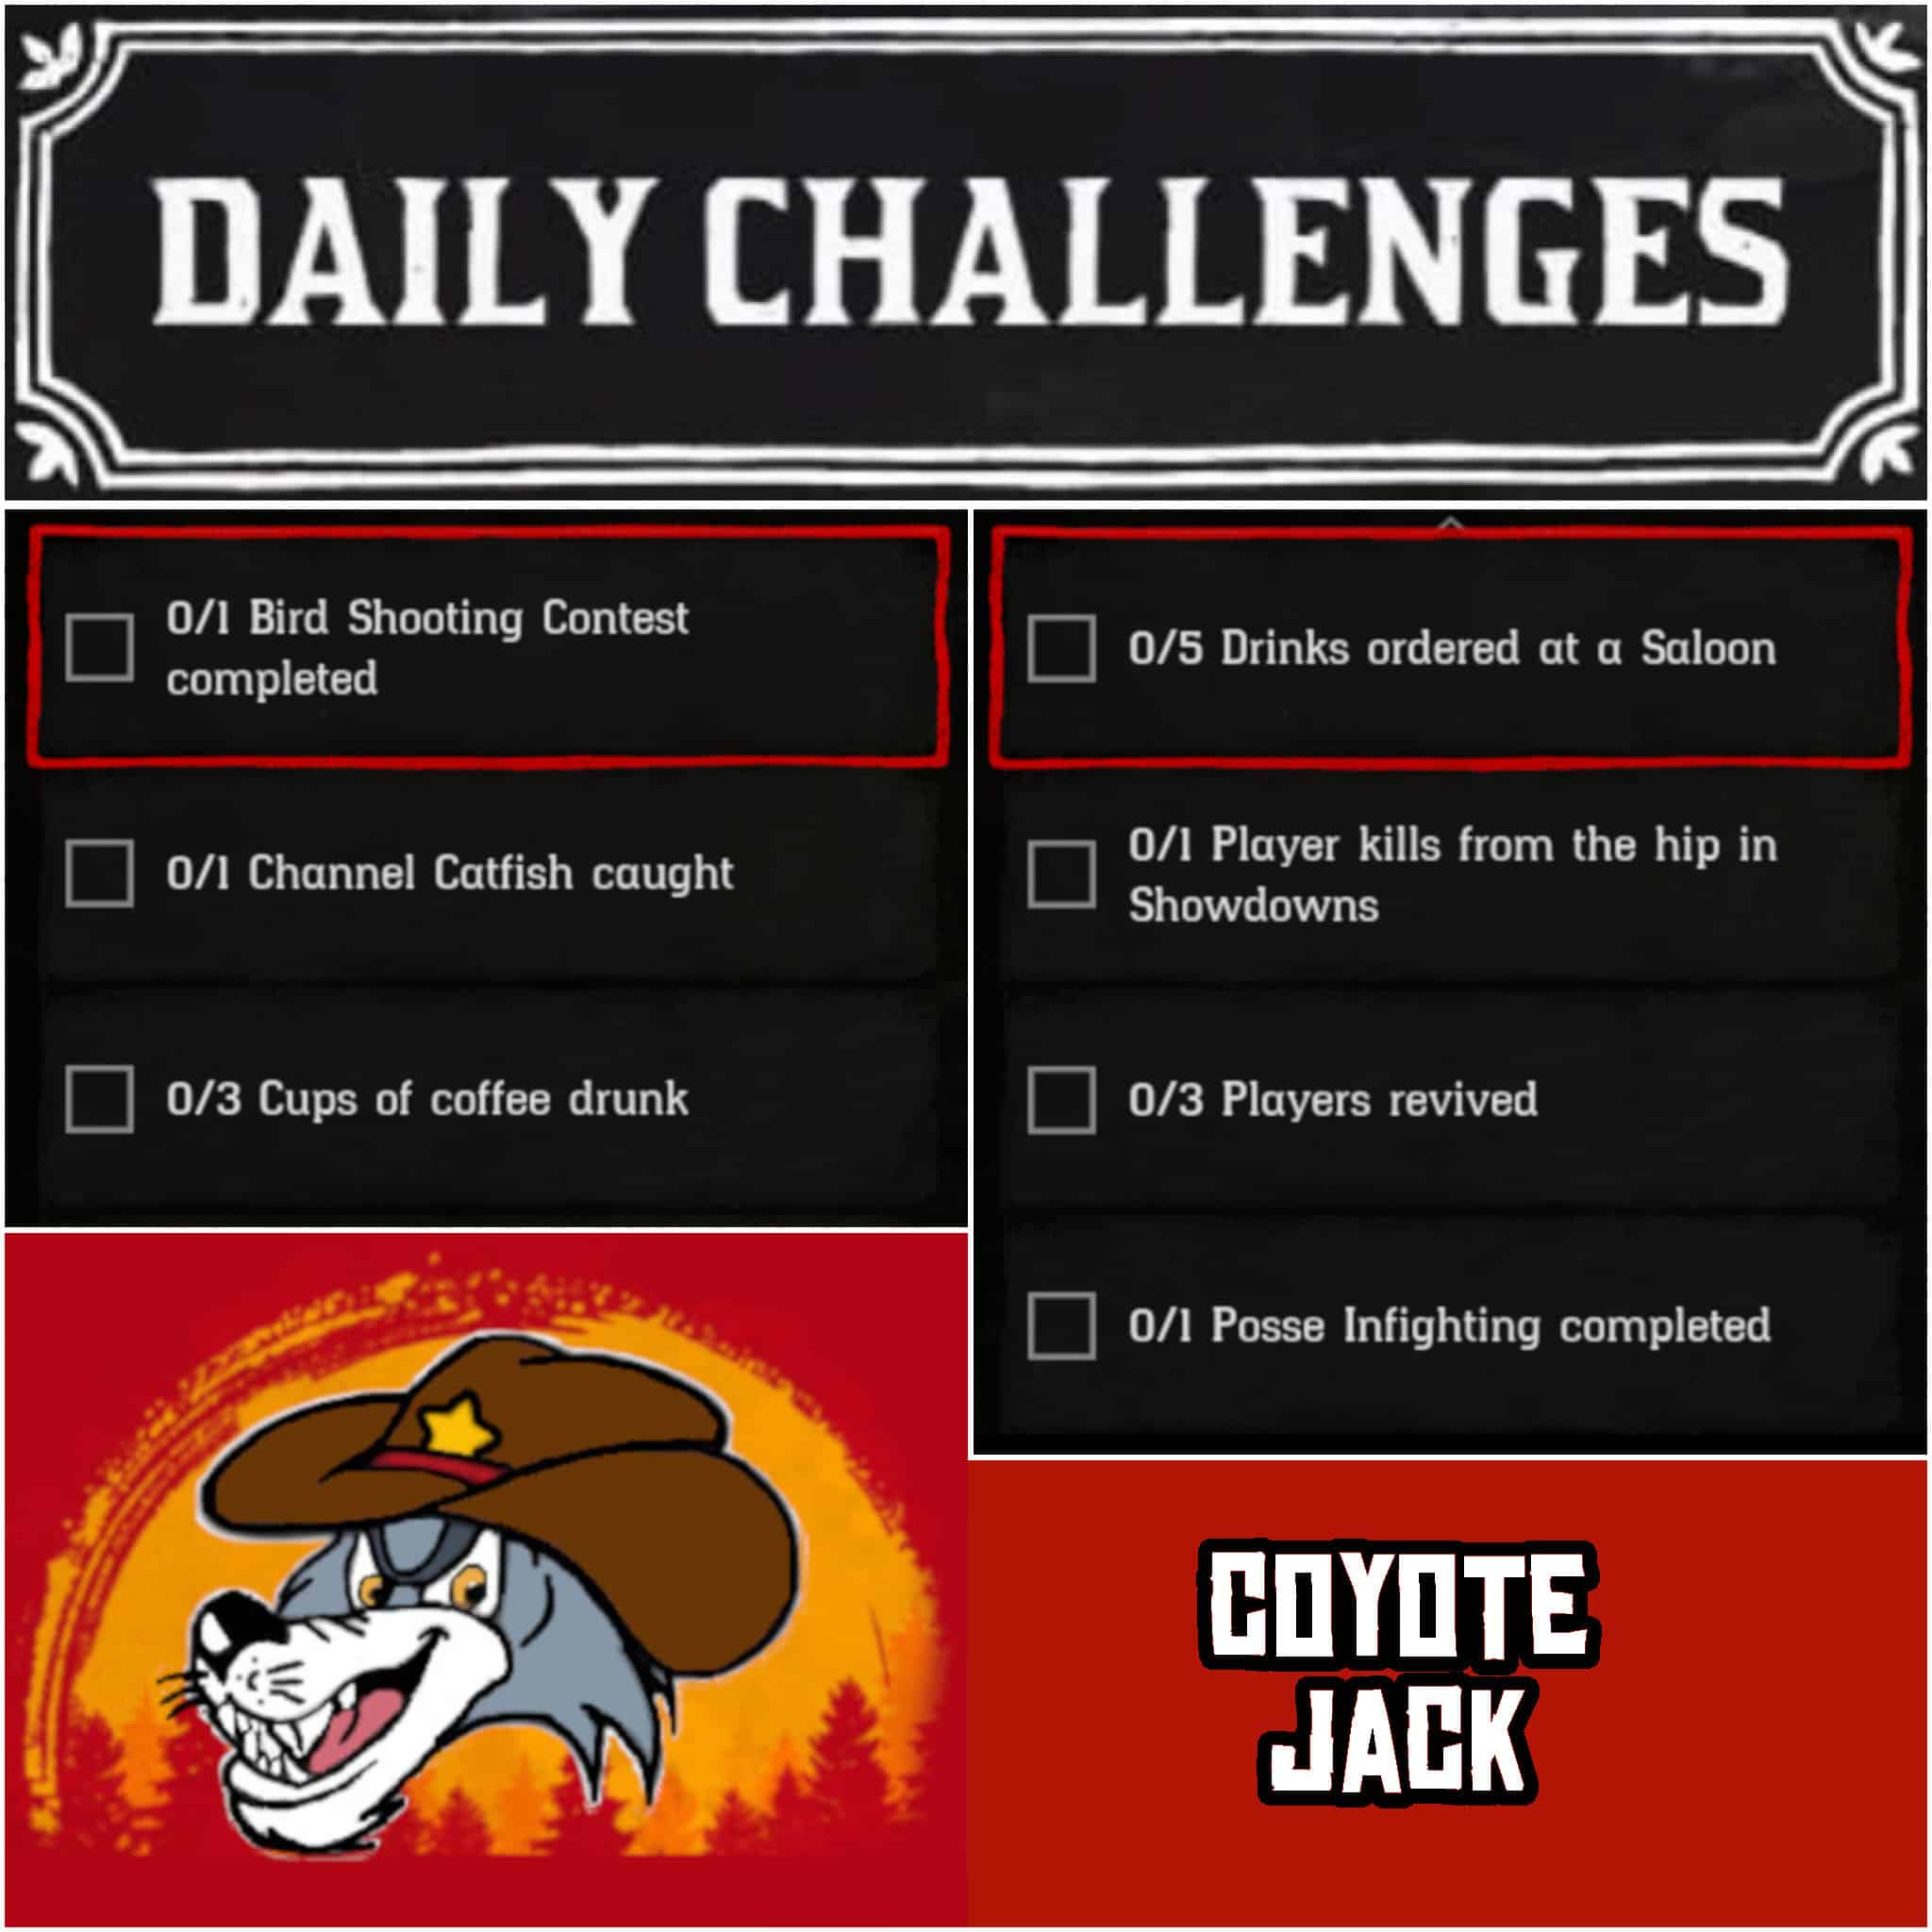 You are currently viewing Wednesday 06 January Daily Challenges